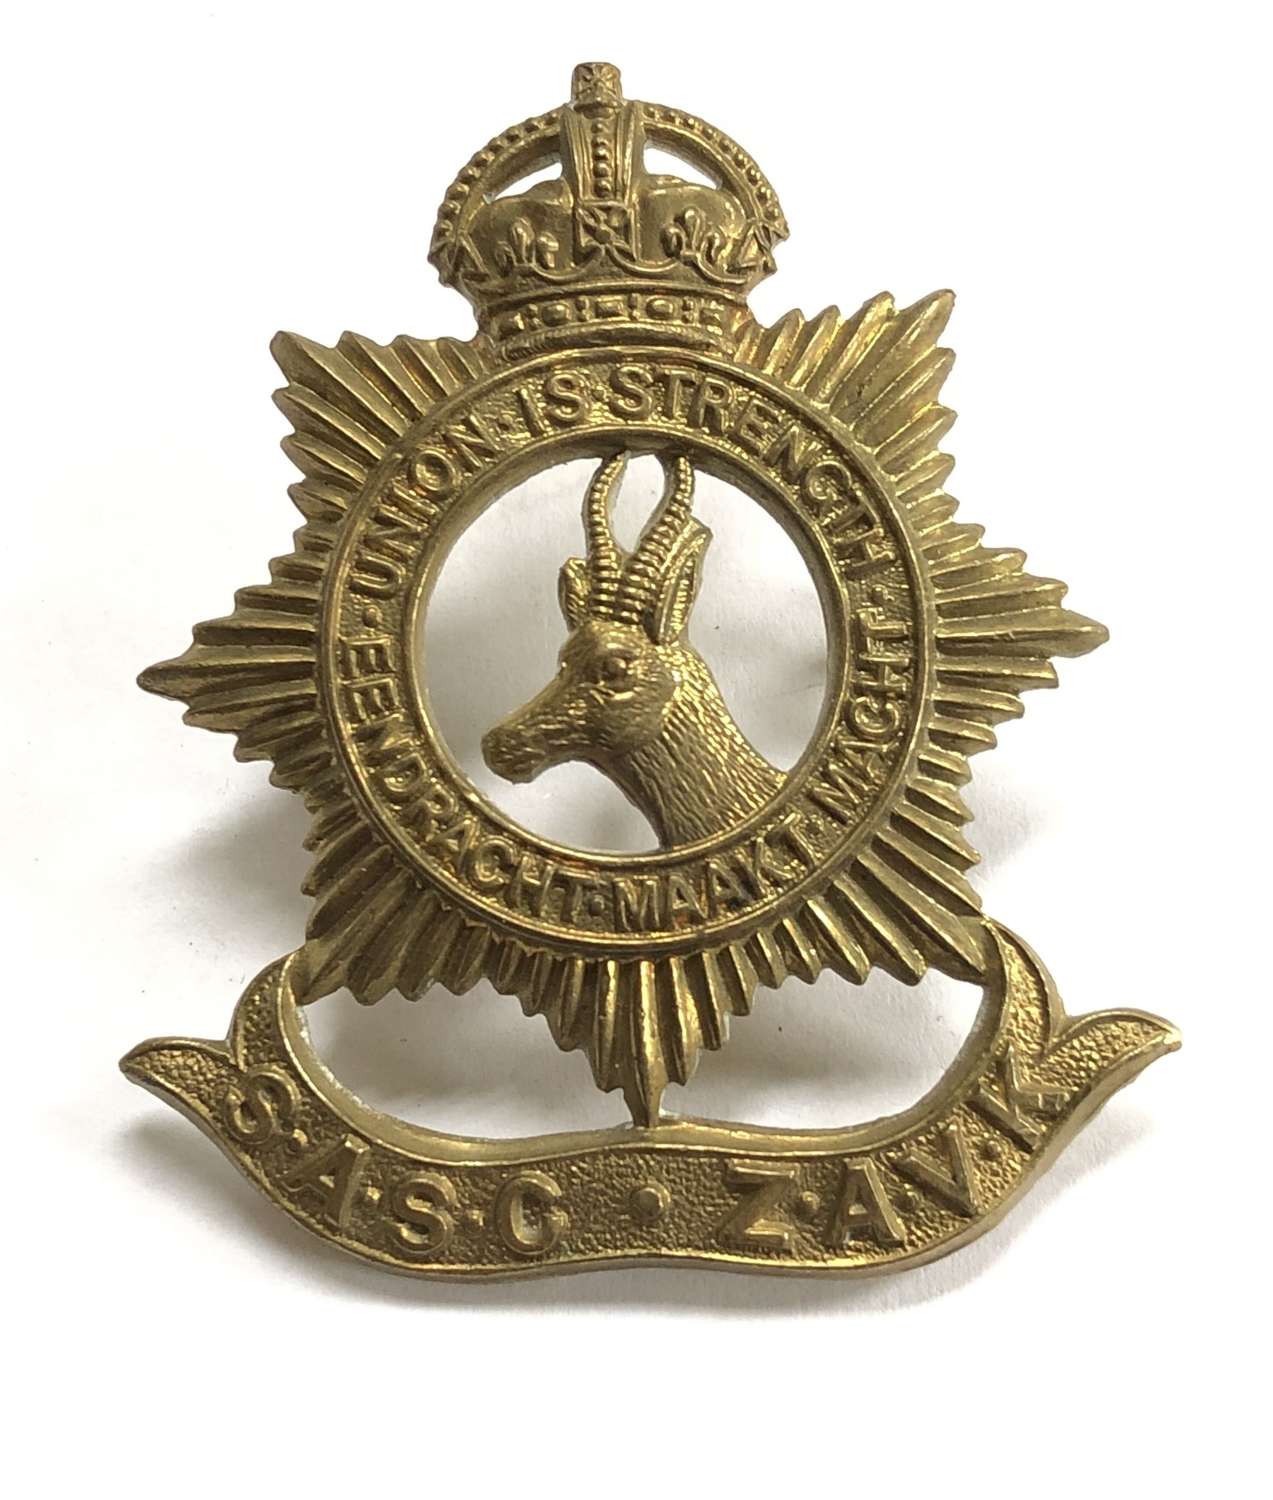 South African Army Service Corps cap badge circa 1916-18 only